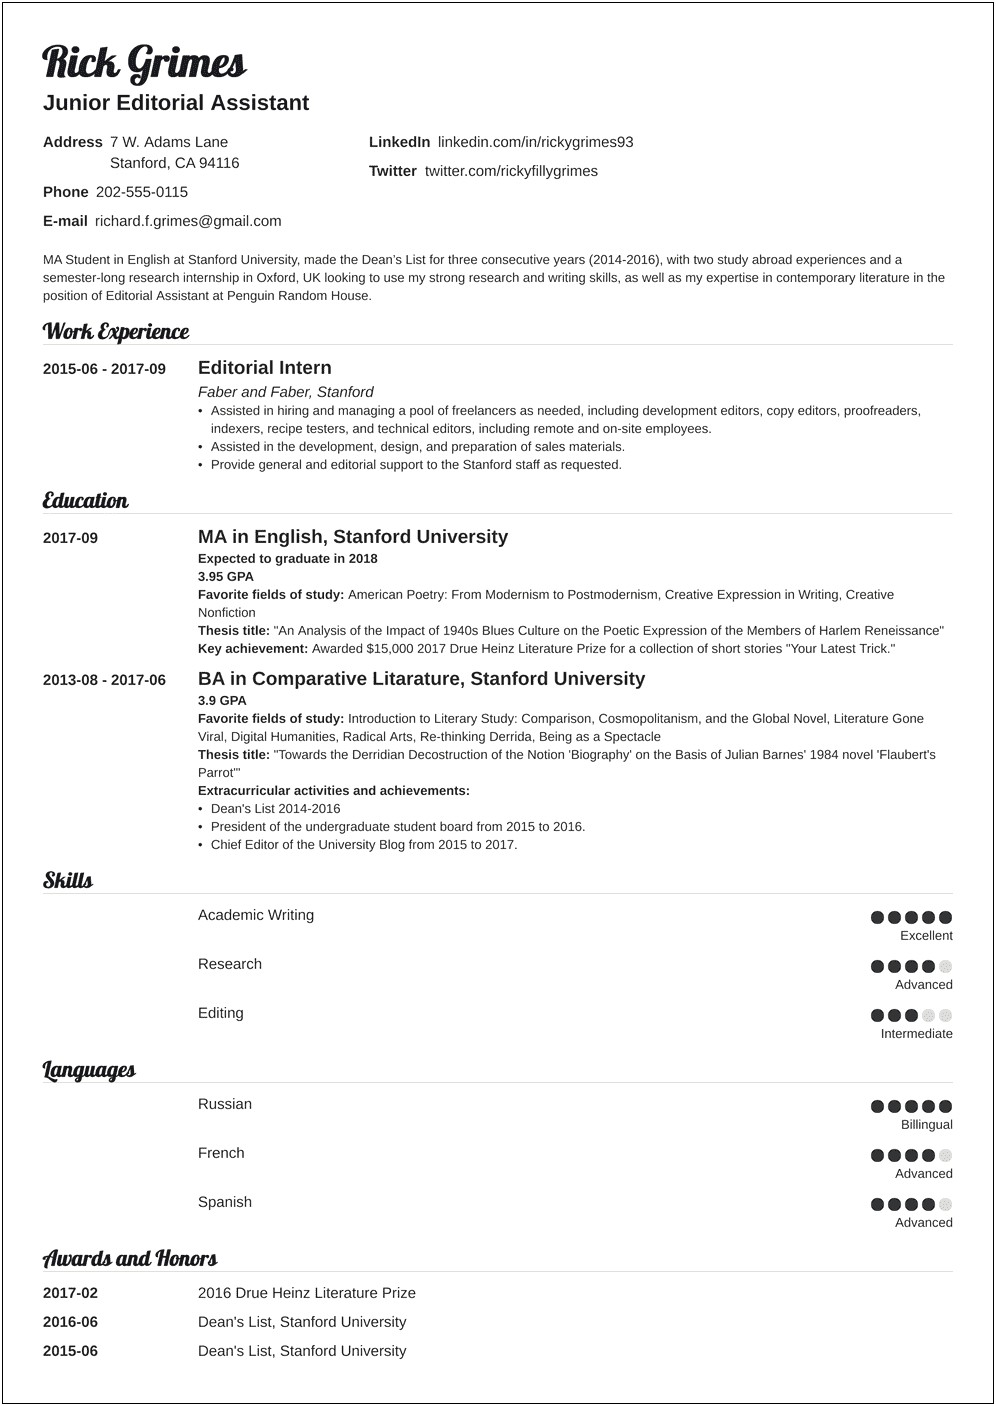 Examples Of Entry Level Job Resumes